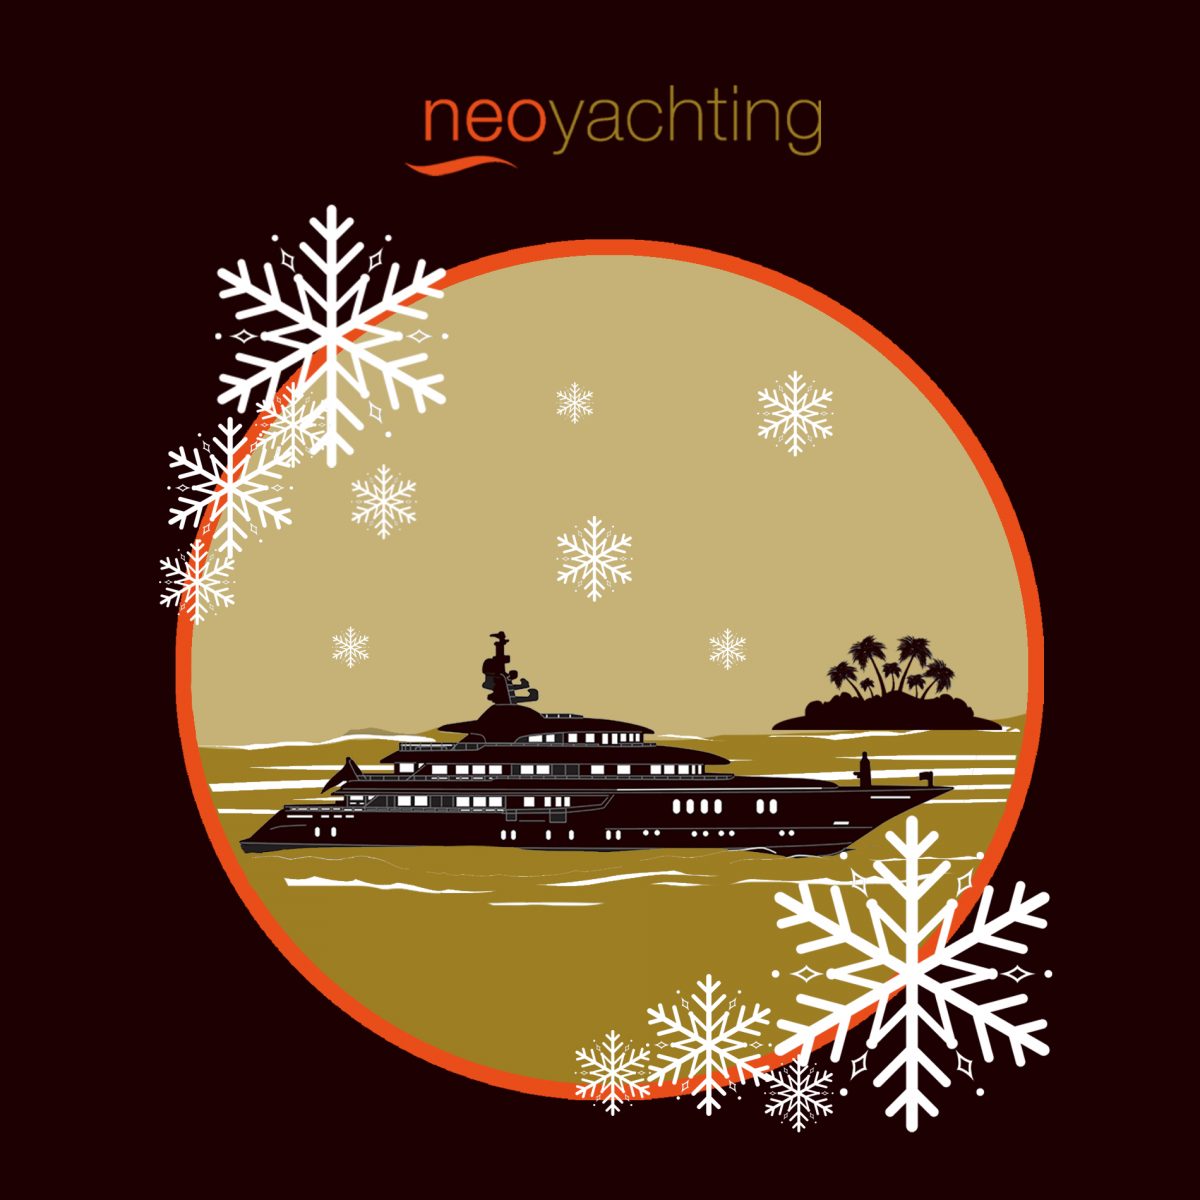 Neo Yachting wishes you Happy Holidays!